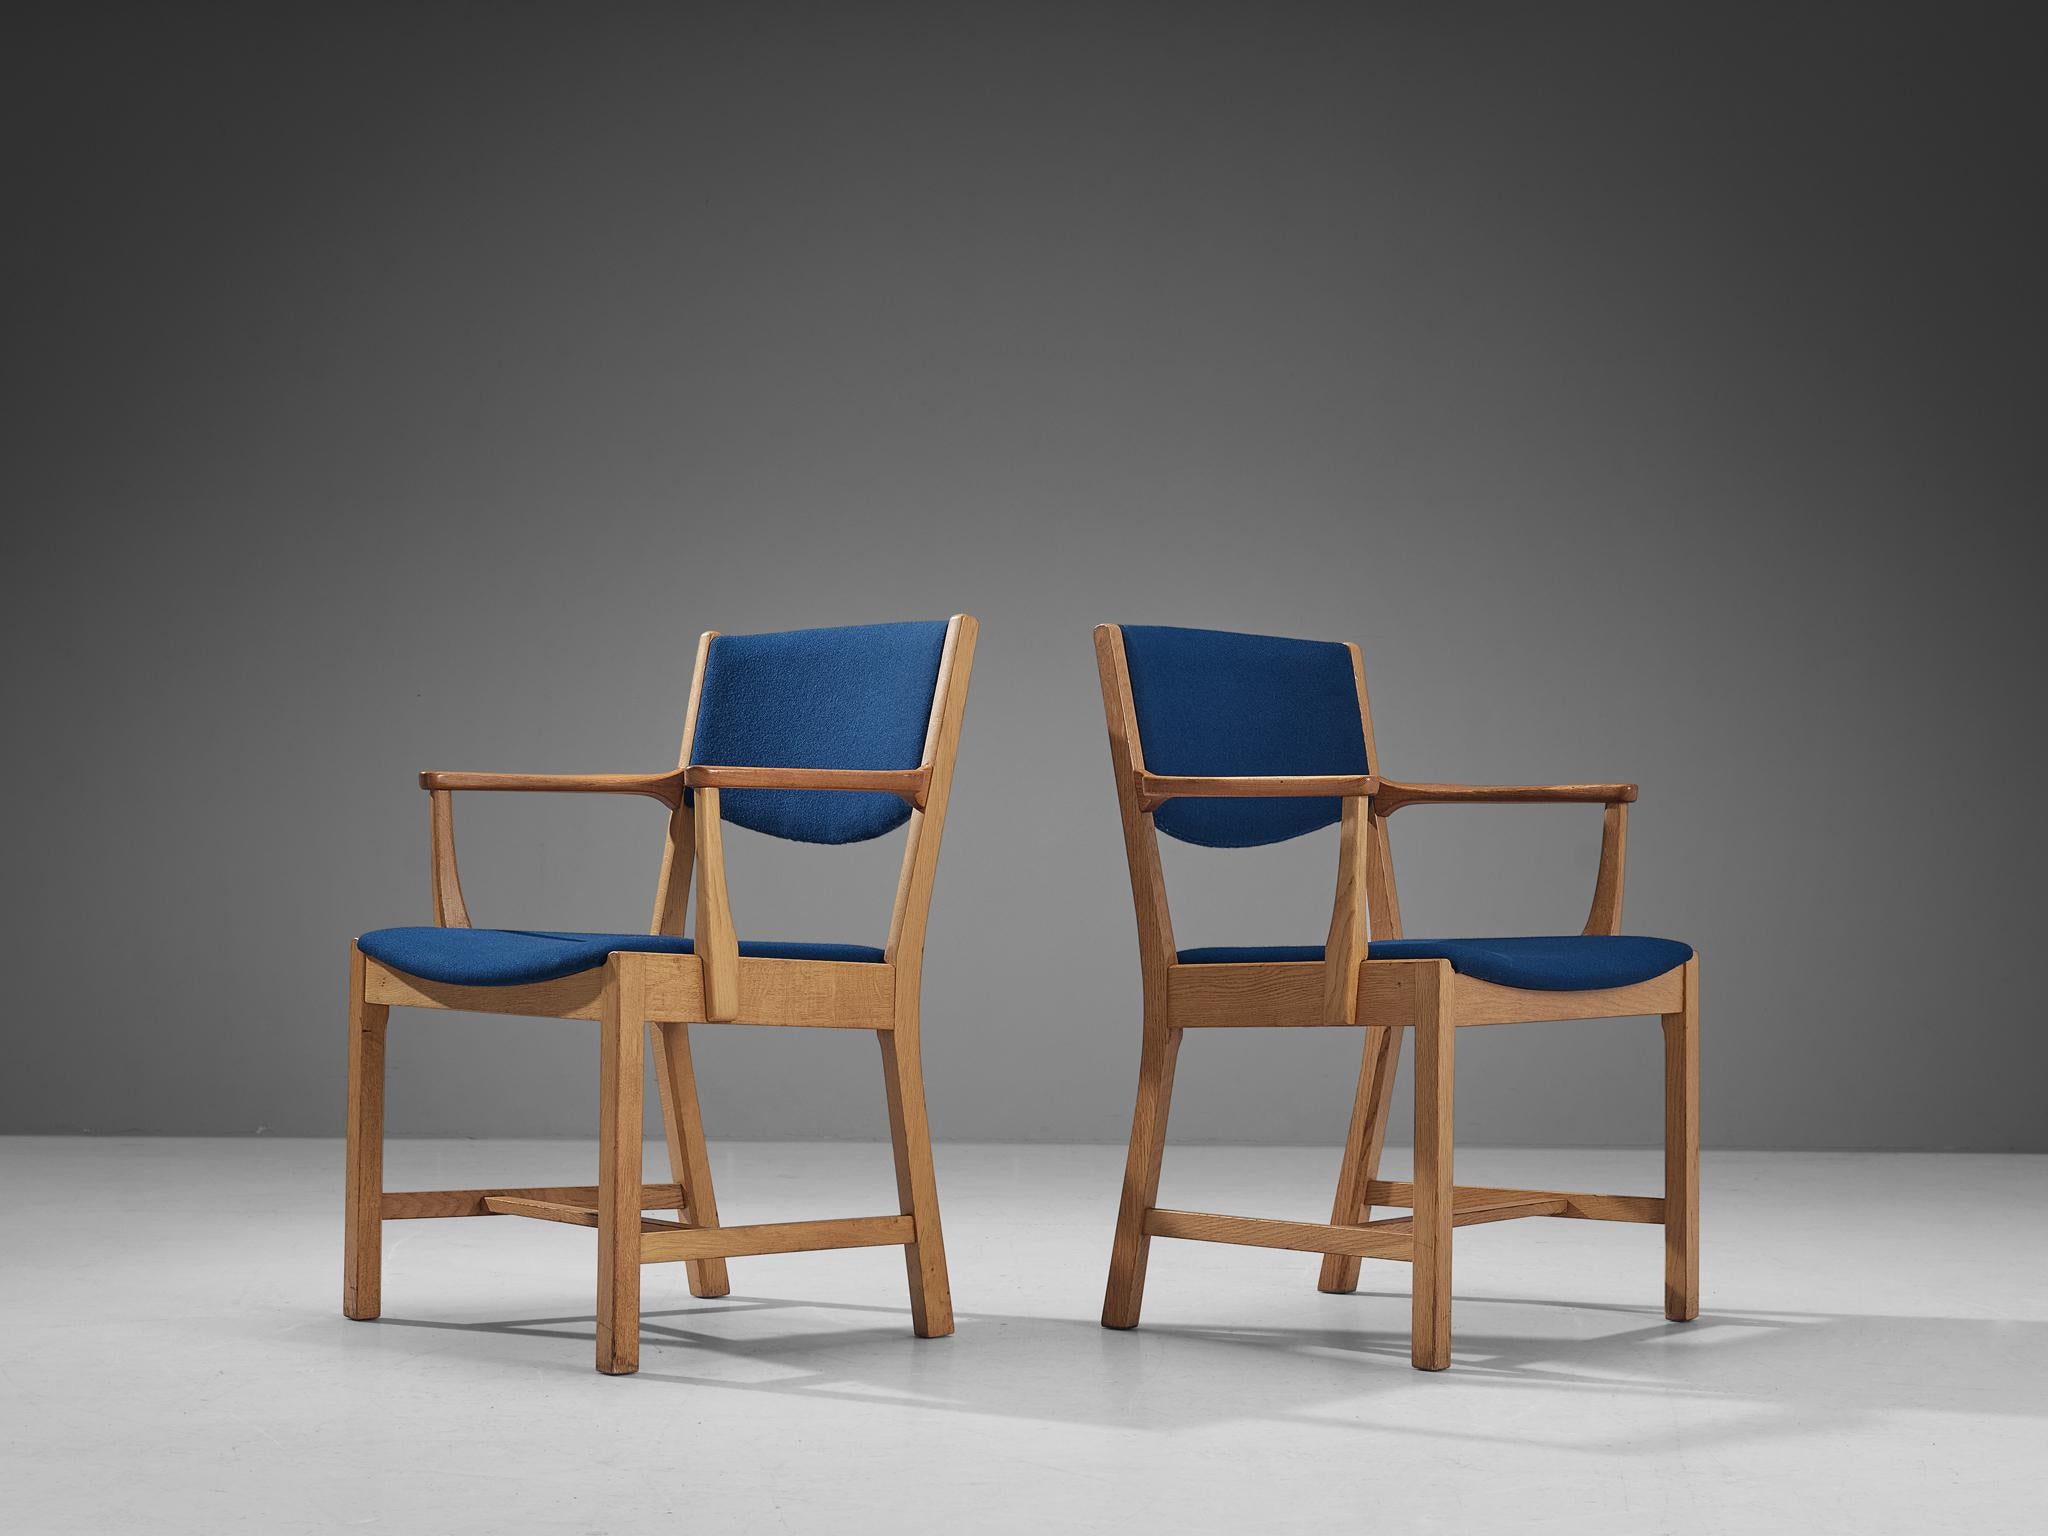 Staten Kontrol Møbler, pair of armchairs, oak, teak, fabric, Denmark, 1960s. 

Pair of Danish armchairs manufactured by Staten Kontrol Møbler. The model with a rounded seat has a characteristic, sculptural frame. The tilted rear legs with sharp